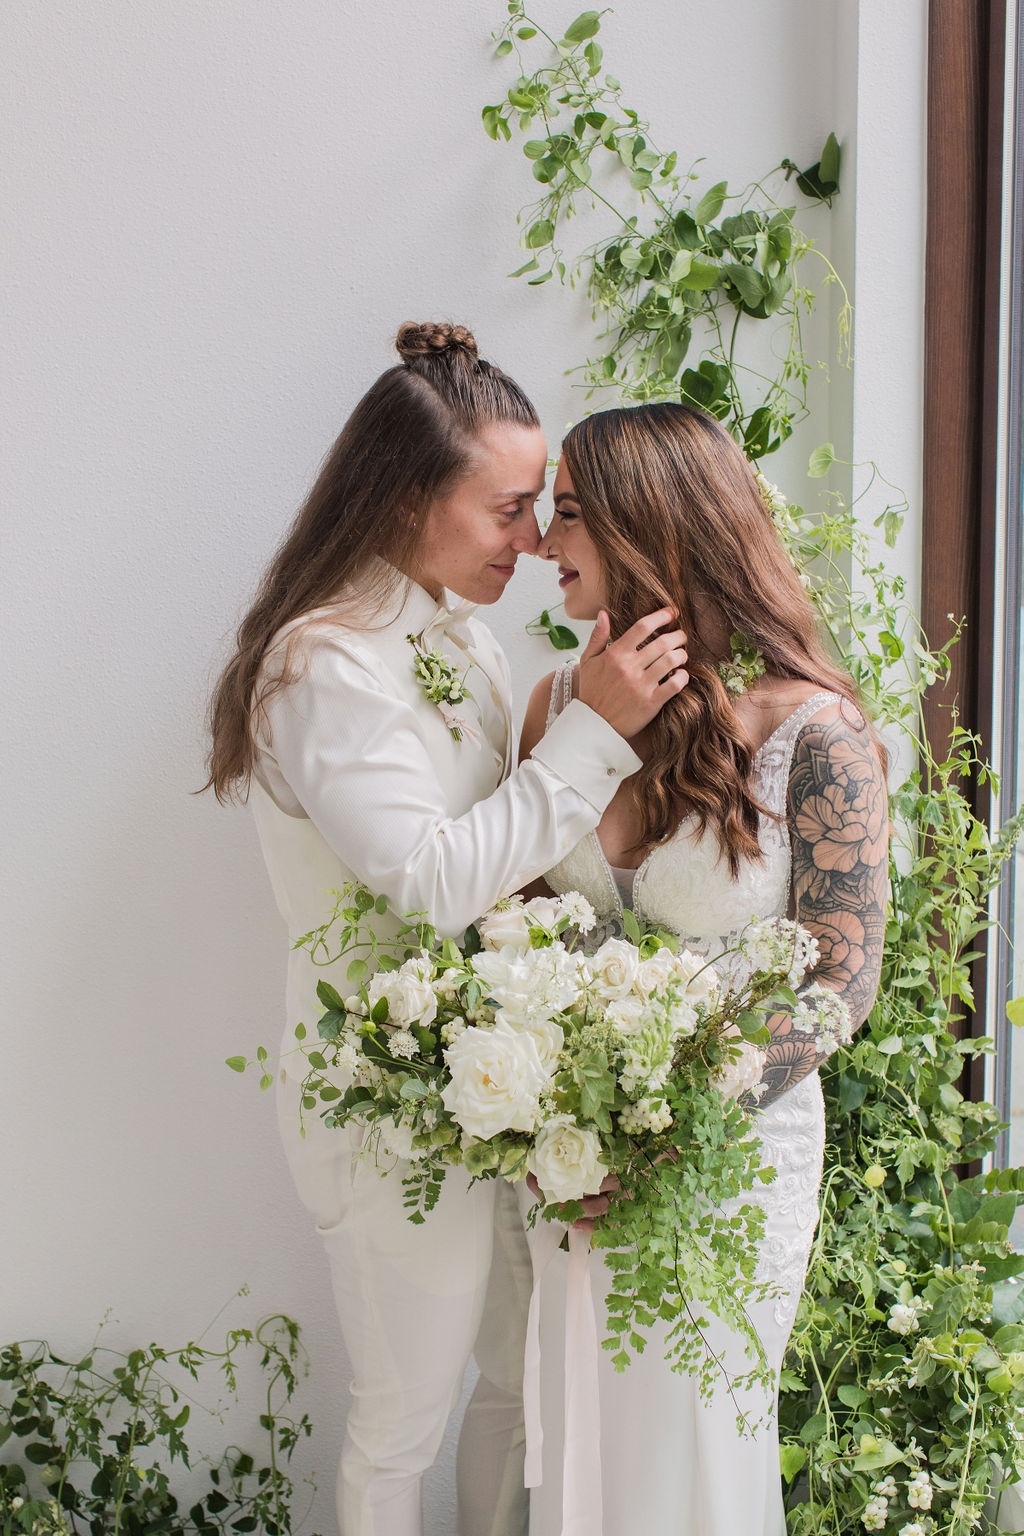 Two lesbian brides at an indoor wedding with green and white decor